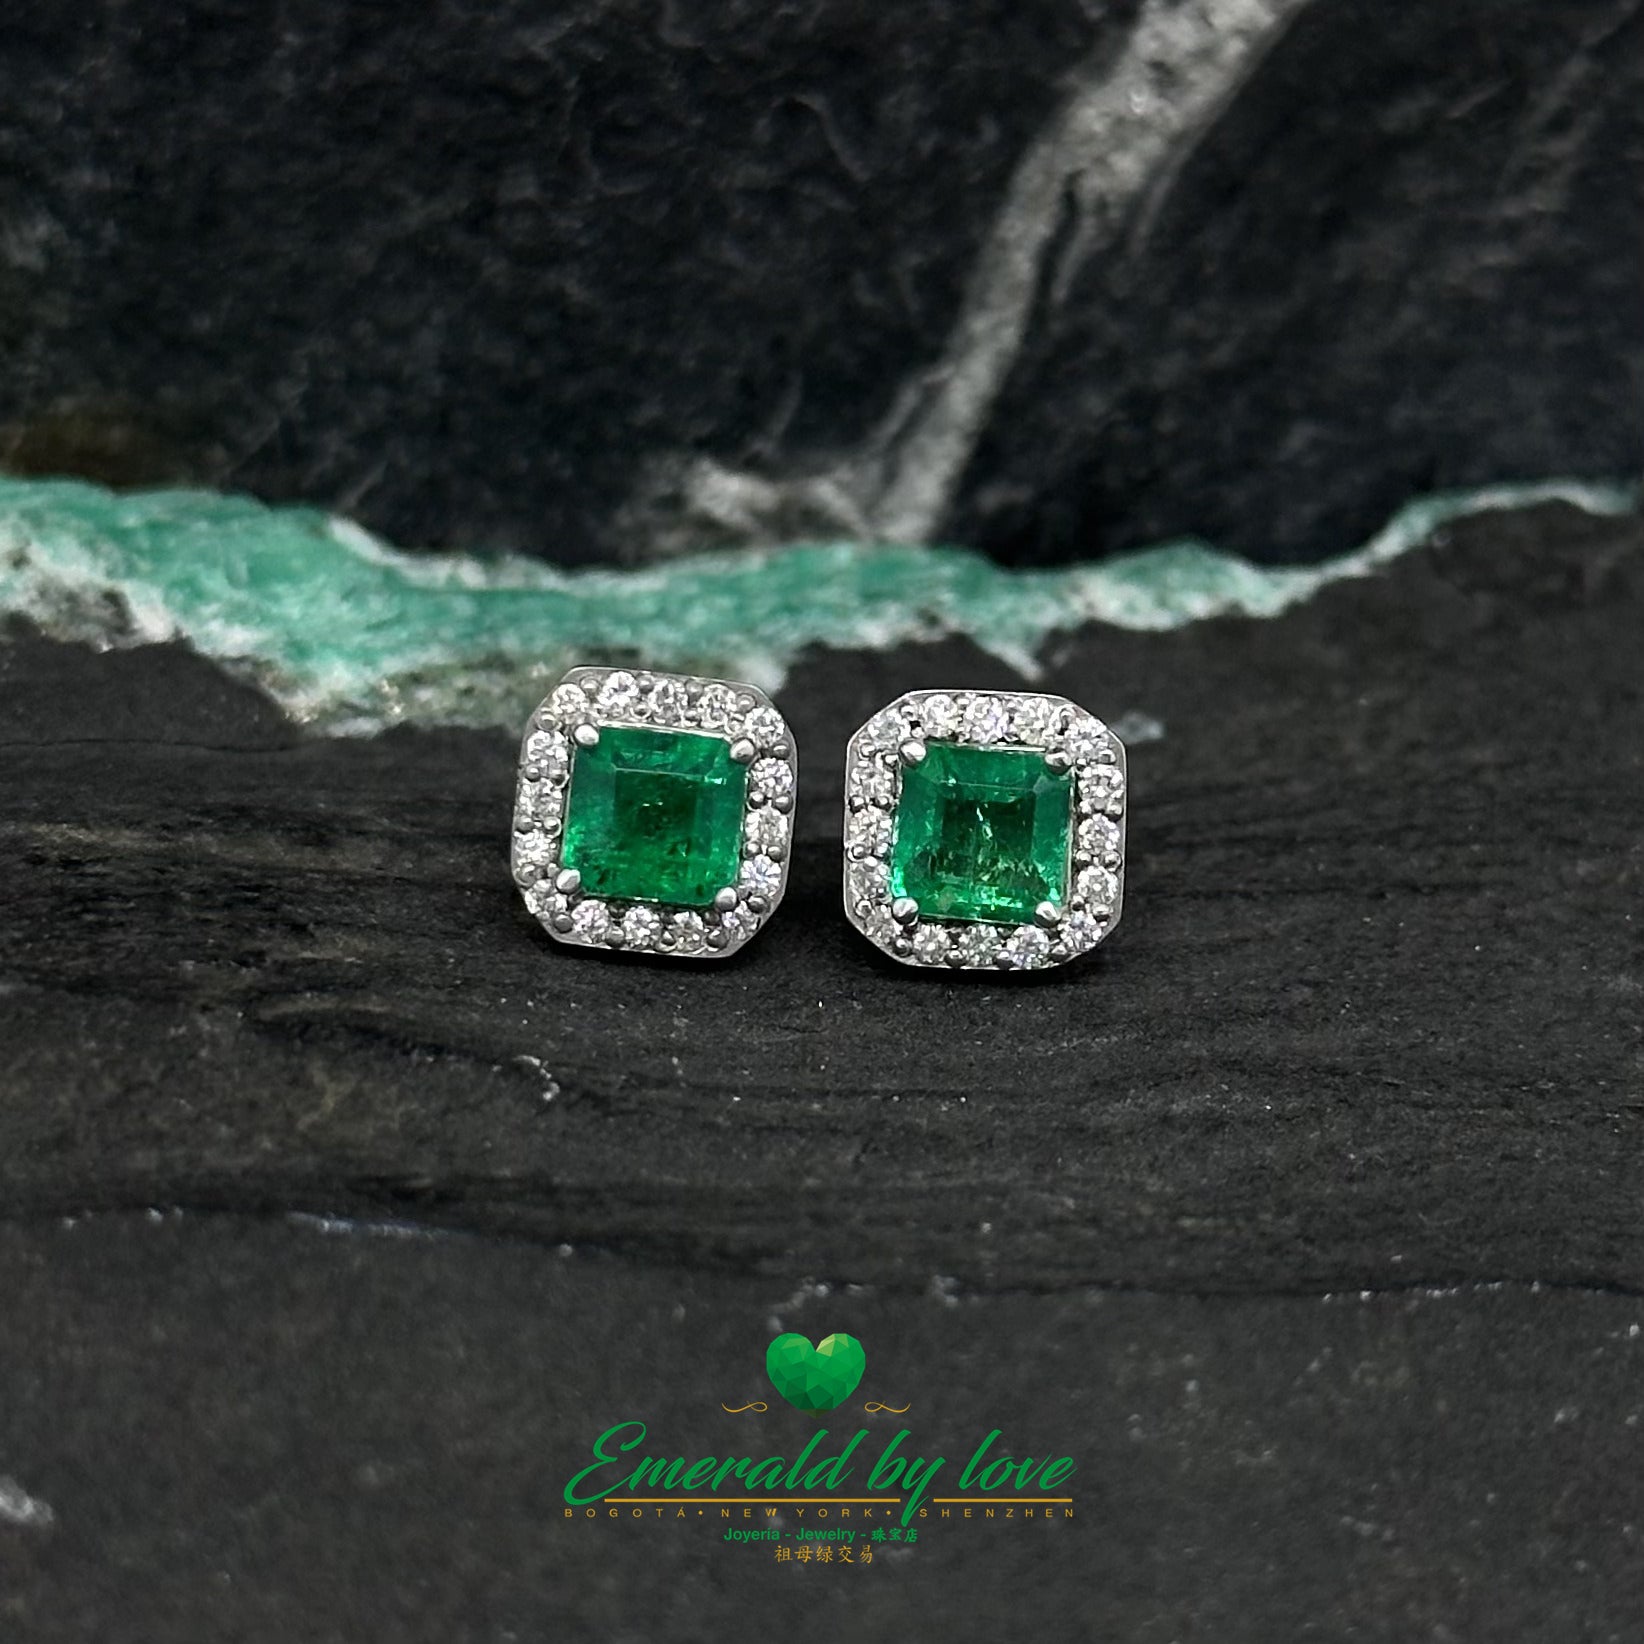 Square Emerald and Diamond Earrings in White Gold: Timeless Elegance